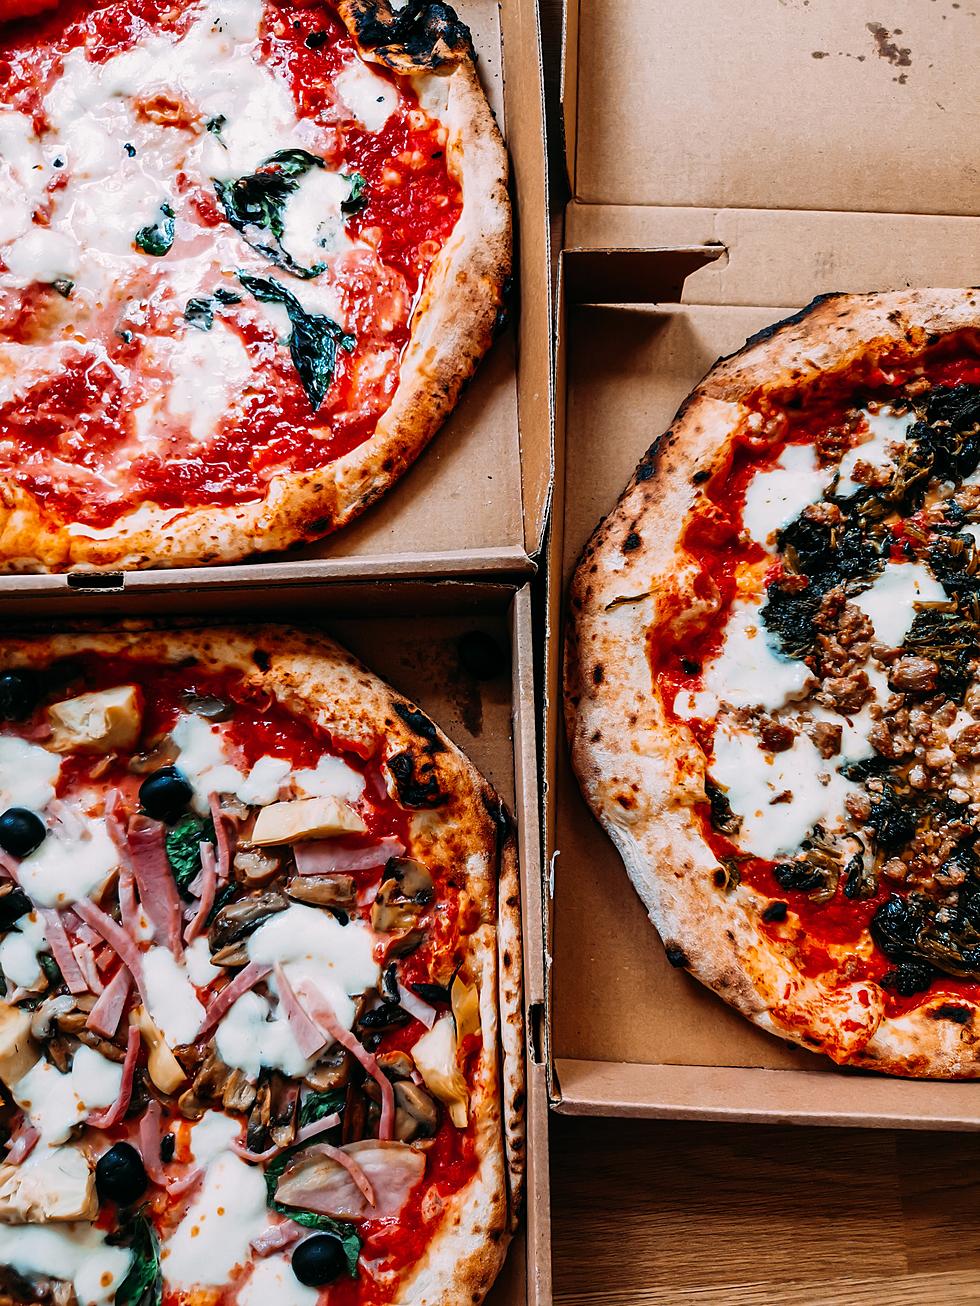 From Thin Crust to Deep Dish, We Found the 5 Best Styles of Pizza in Boise